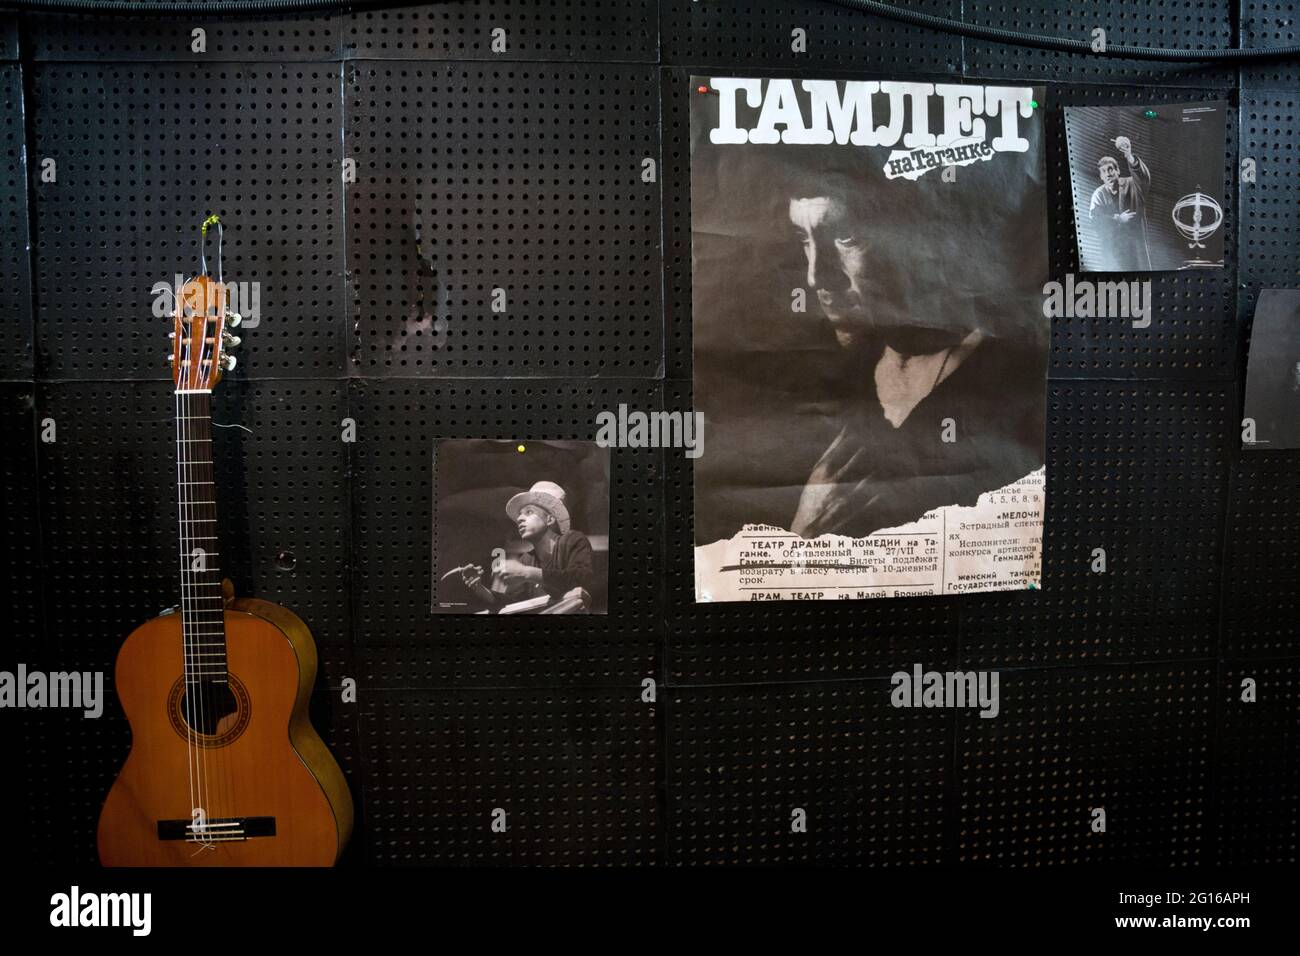 Moscow, Russia. 14th of February, 2014 Playbill of the play 'Hamlet' with a photo of Vladimir Vysotsky, guitar and photos from the performances on the wall in the office of the sound engineer of the Taganka Theater Stock Photo